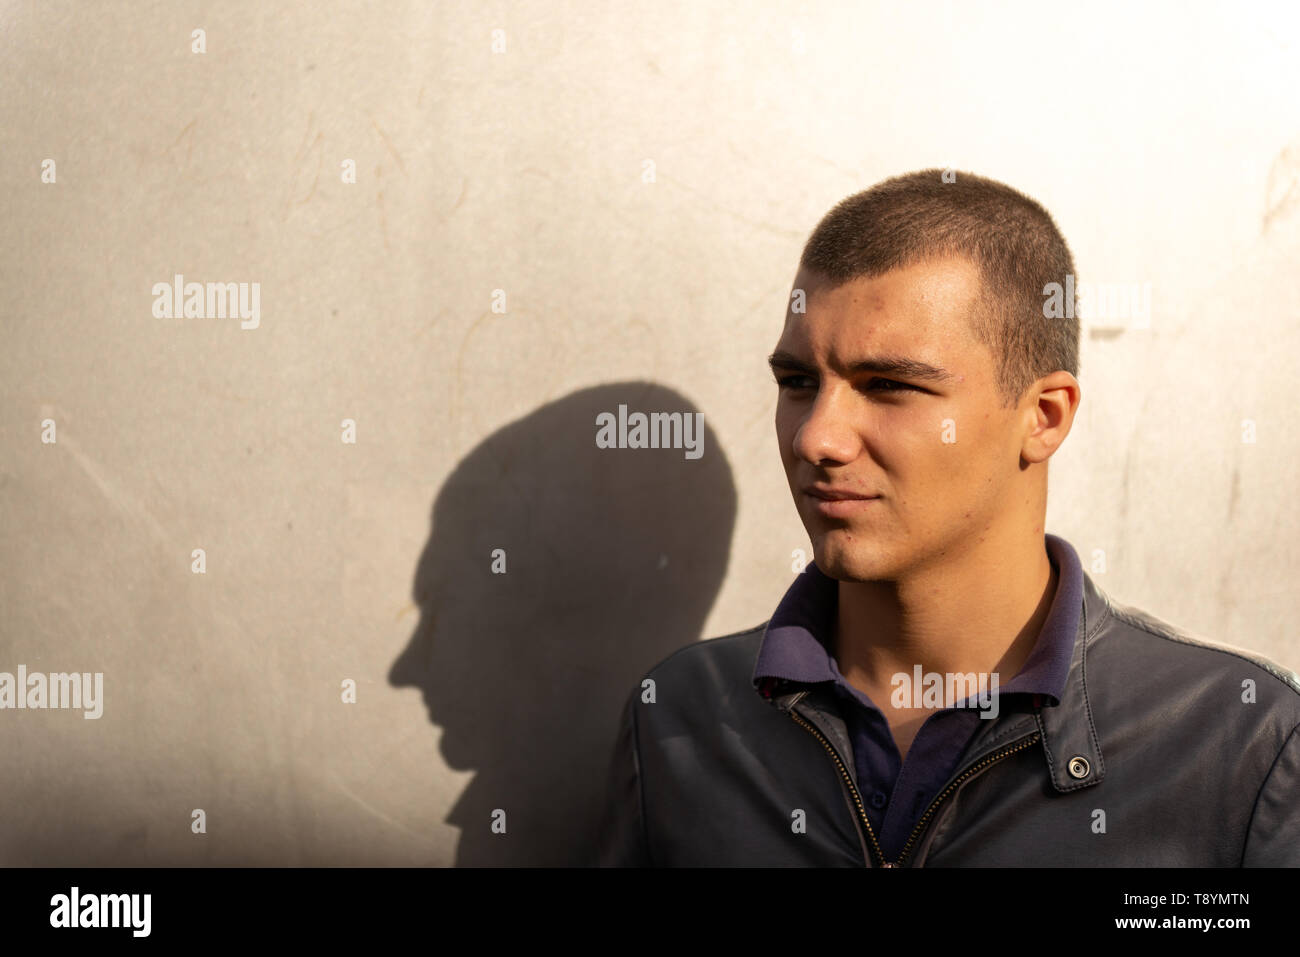 Portrait of 20-30 years young man and his shadow looking away and brightly lit background wall. MR Images of people with lots of copy space. Stock Photo